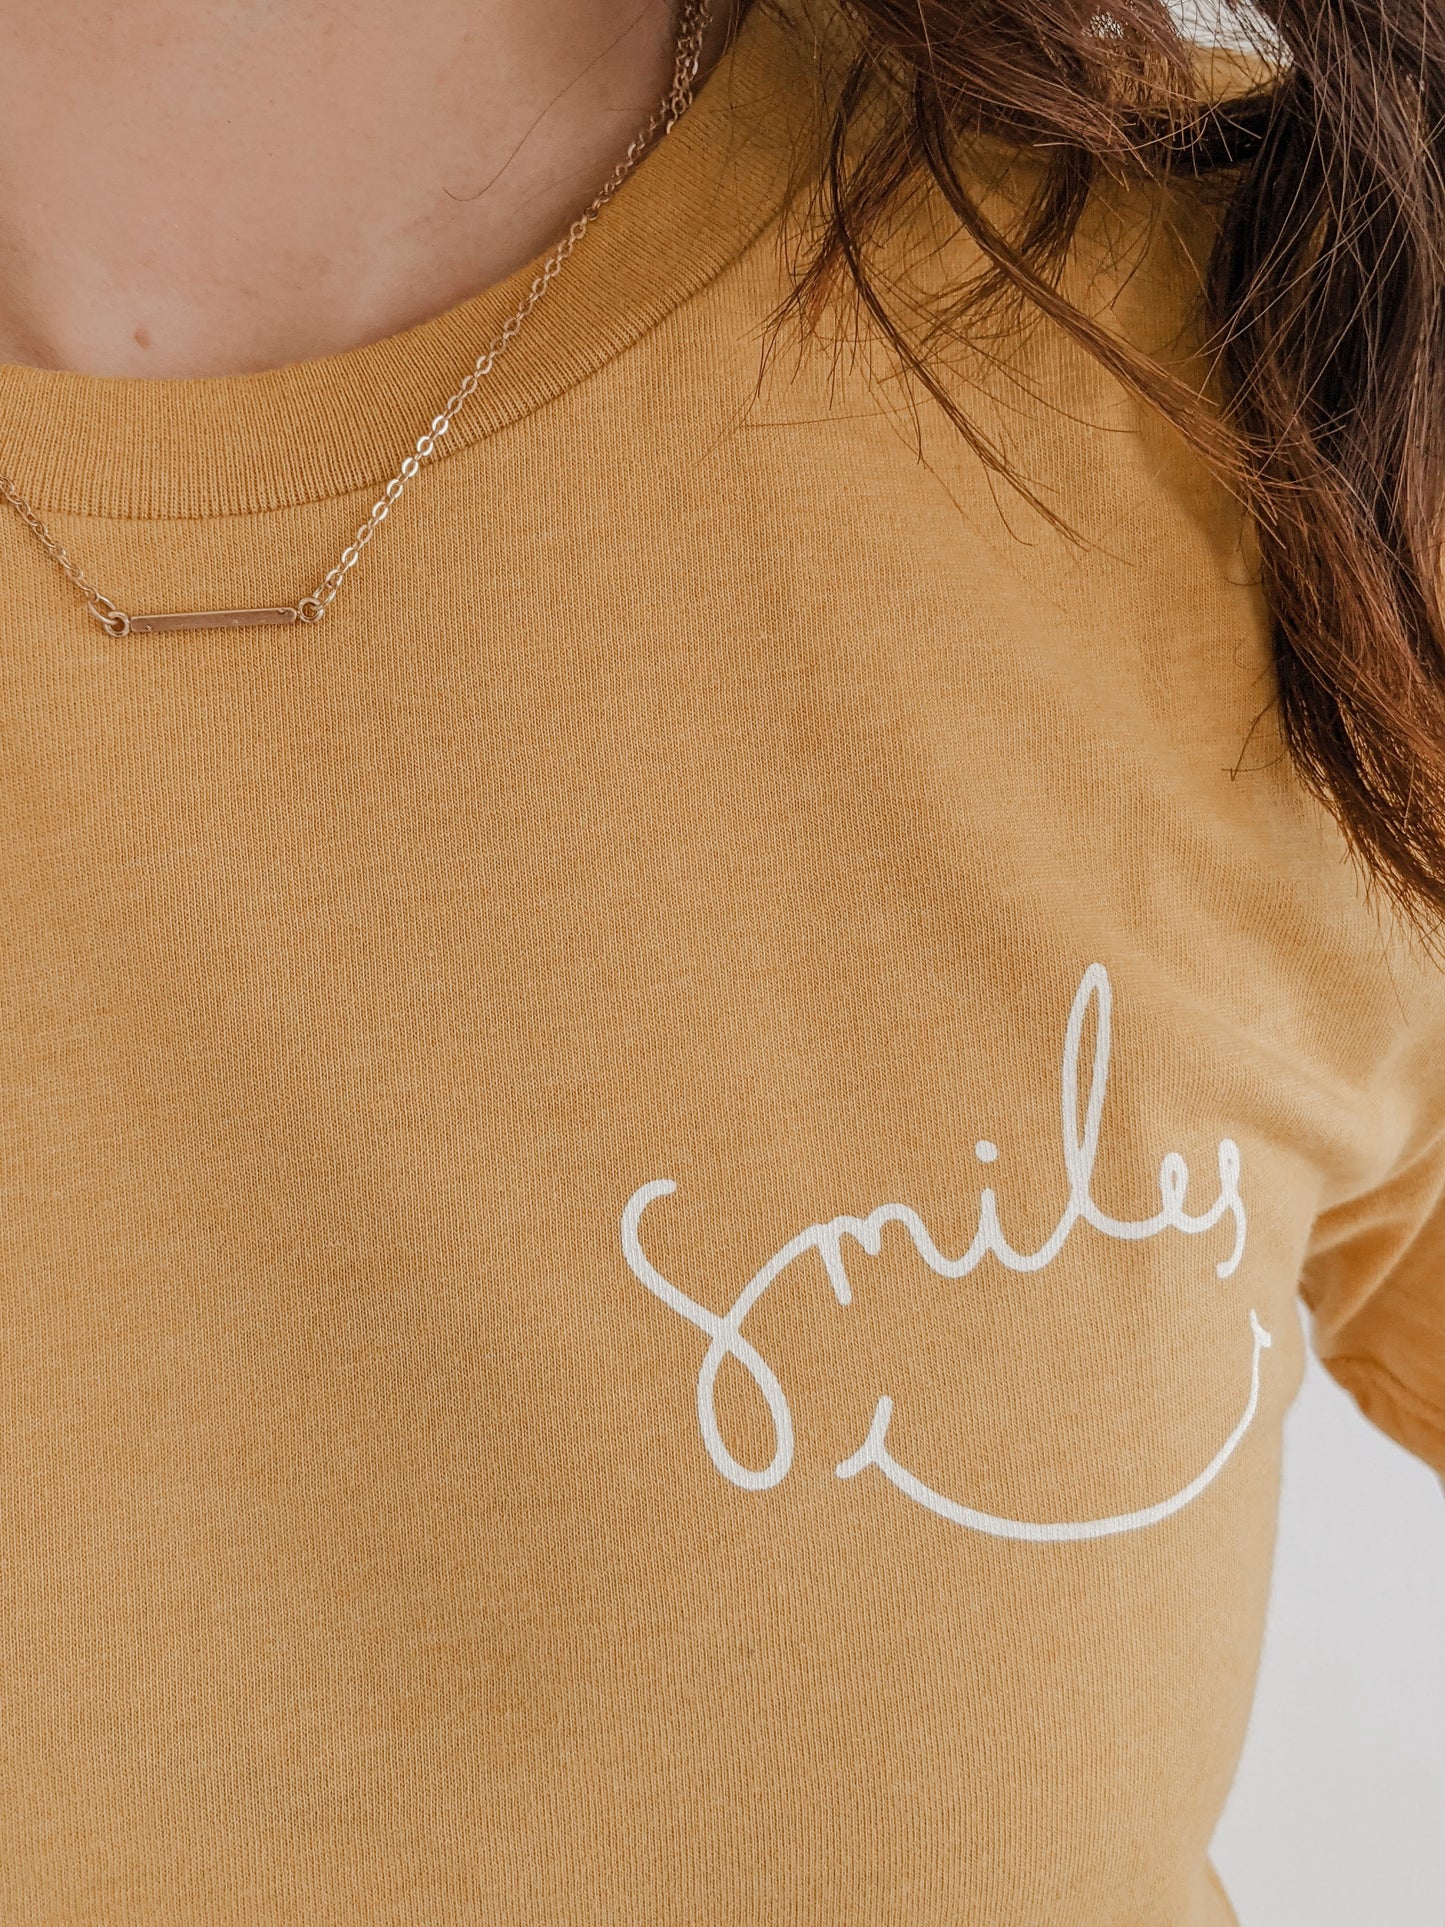 SMILES TEE,Tops,CASUAL, GRAPHIC TEE, GRAPHIC TEES, T-SHIRT- DEFIANT